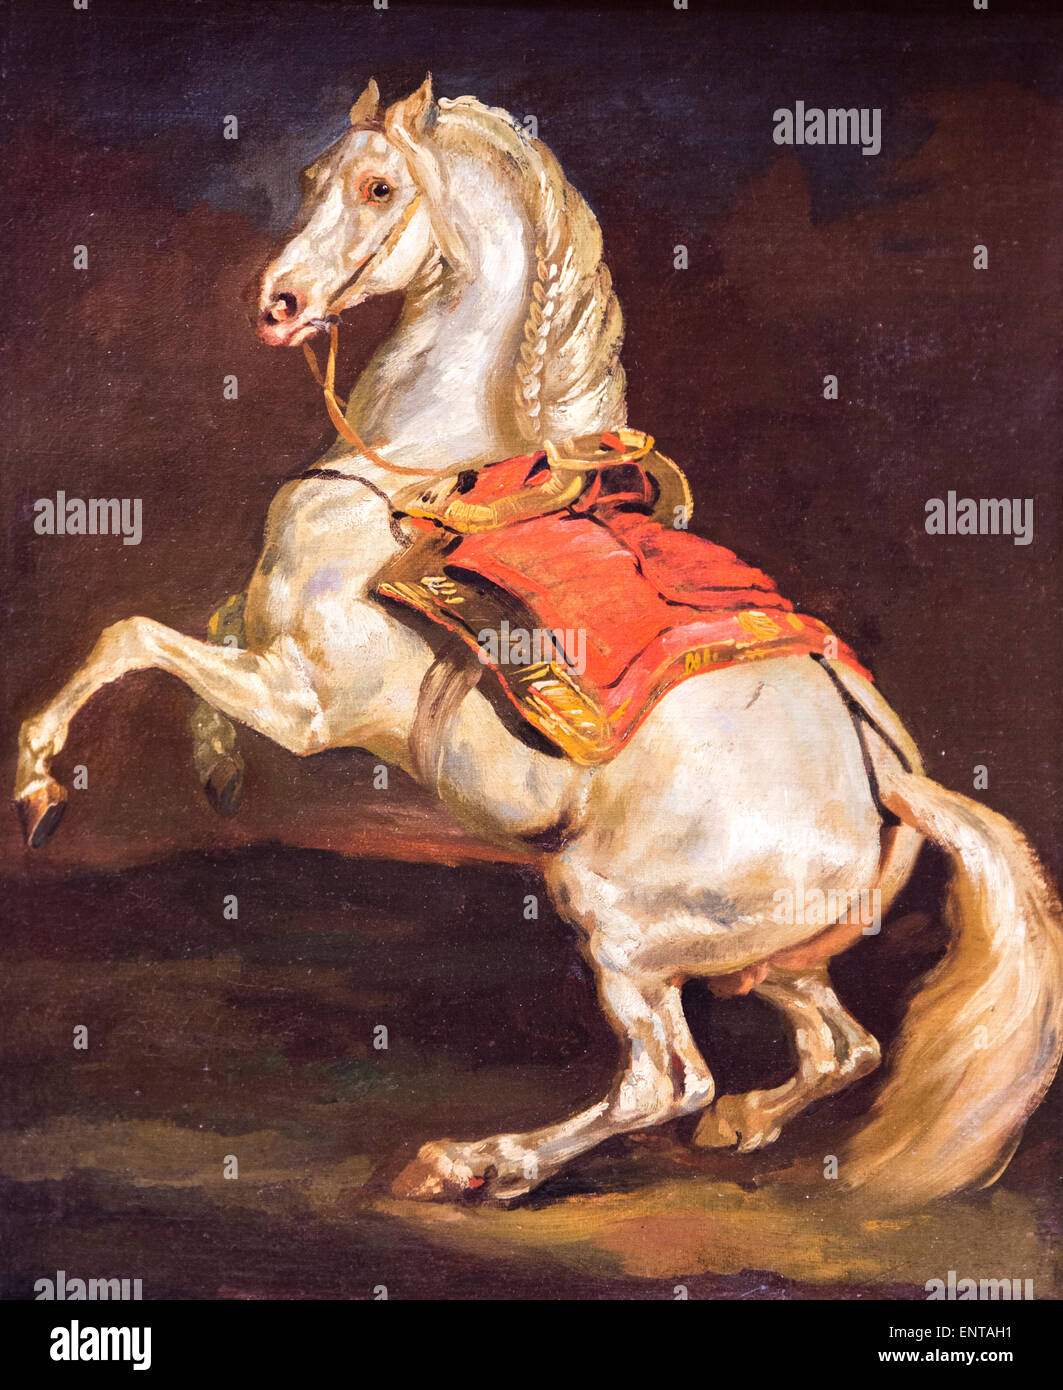 ActiveMuseum 0006138.jpg / Prancing Horse red saddlecloth, formerly said: Tamerlan, the emperor's horse 04/12/2013  -   / 18th century Collection / Active Museum Stock Photo